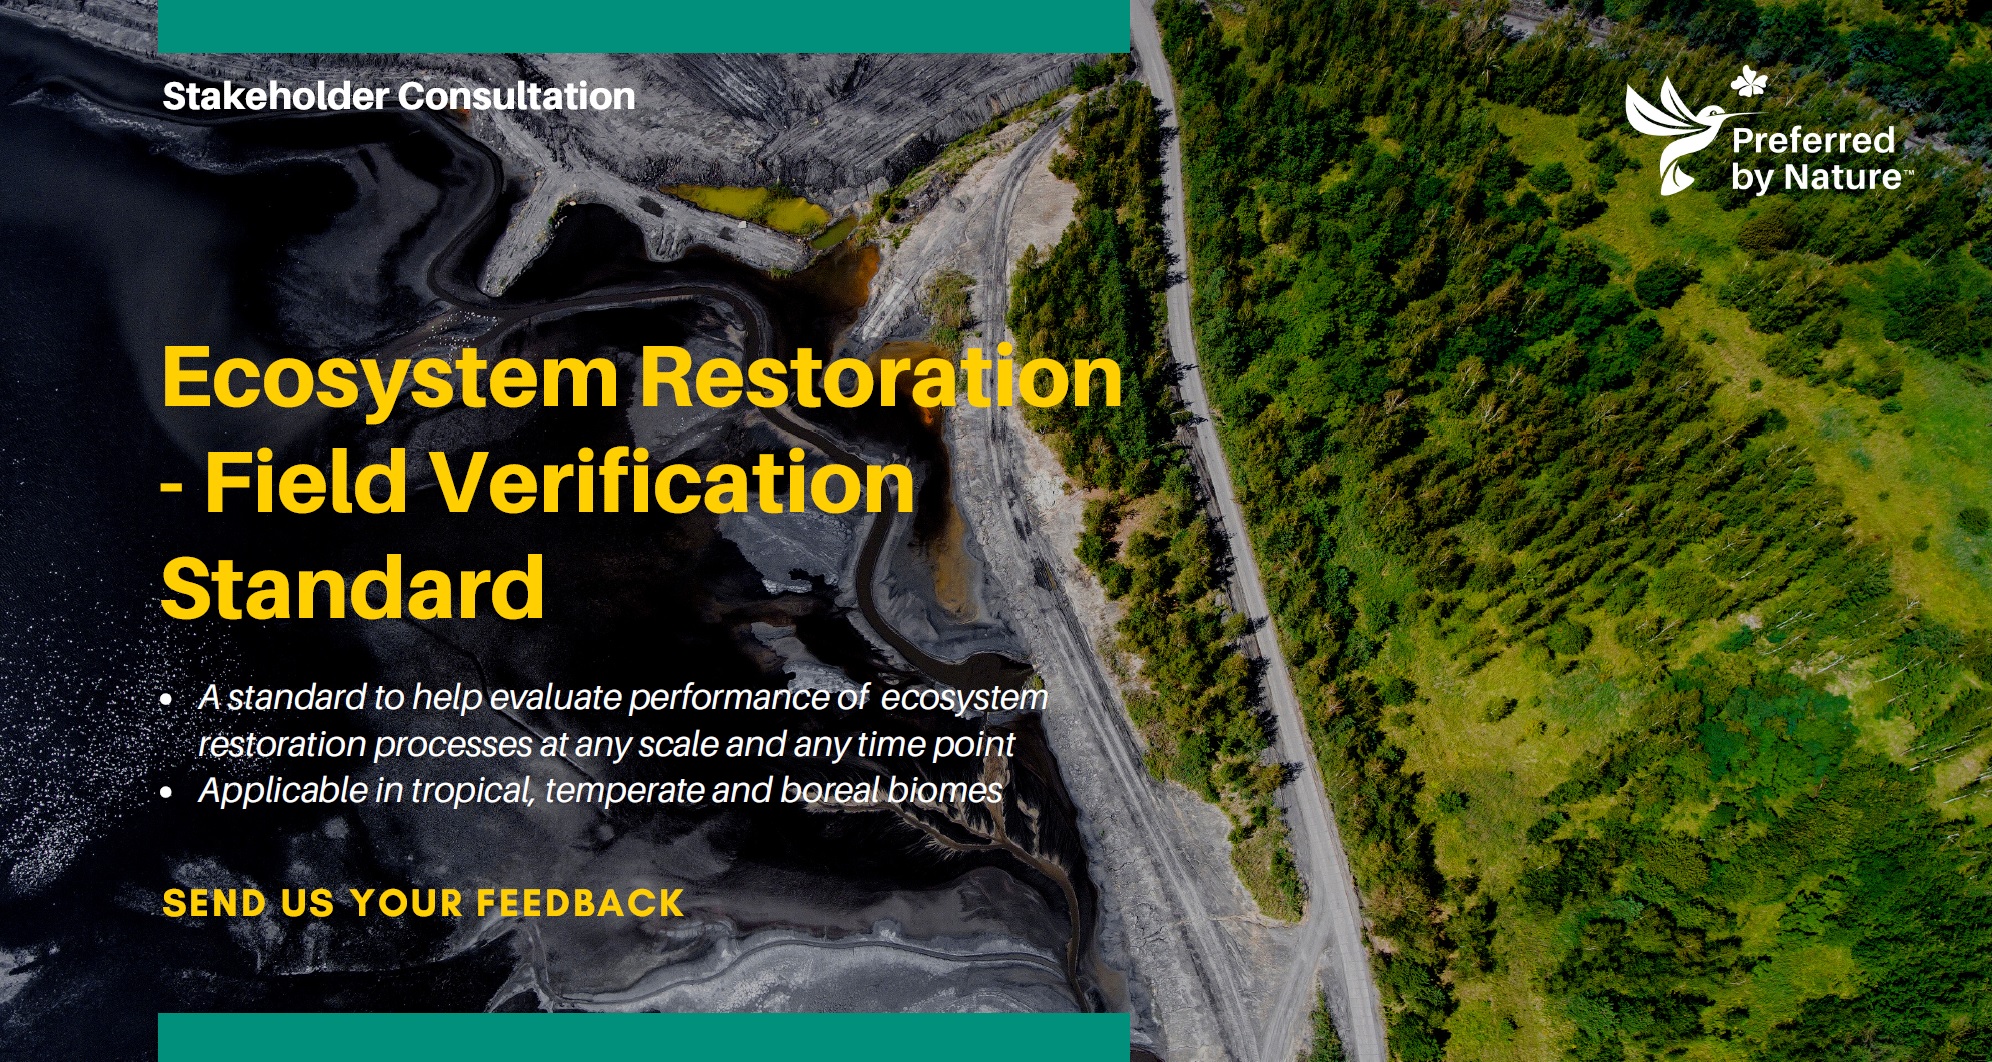 Preferred by Nature announces consultation on a new version of the standard on ecosystem restoration